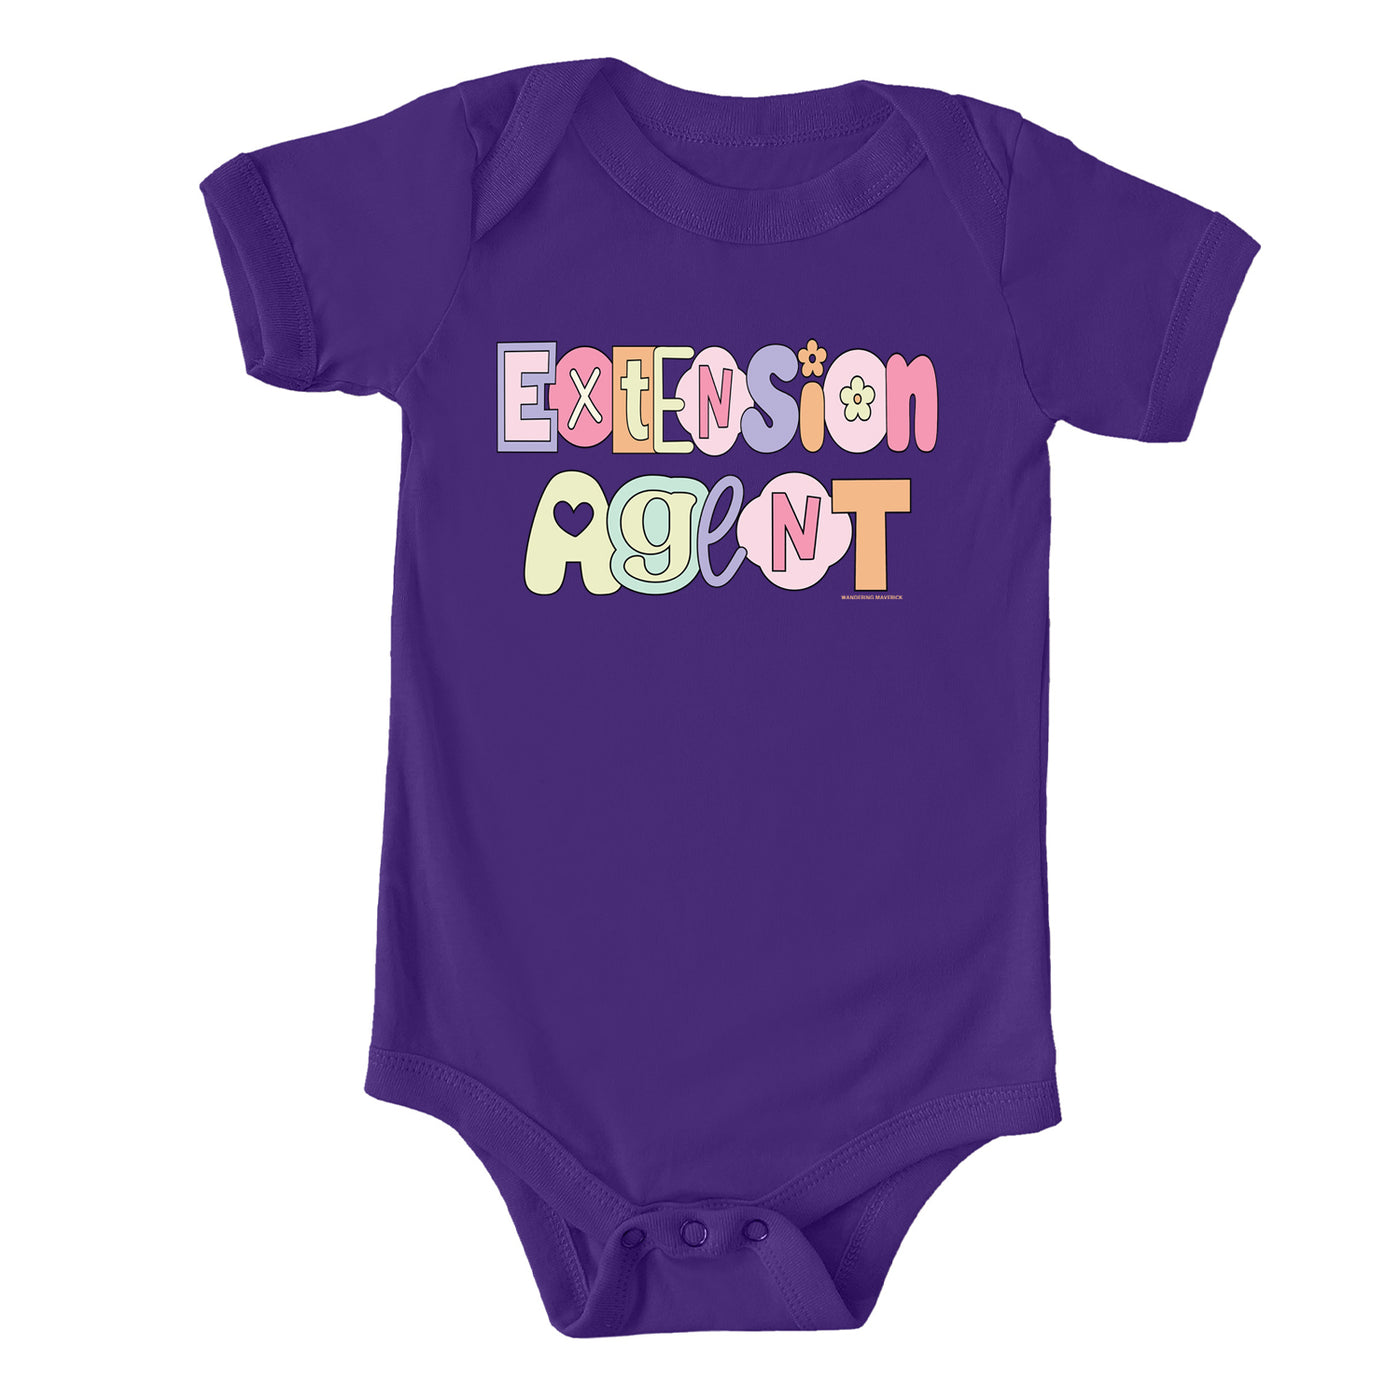 Pastel Extension Agent One Piece/T-Shirt (Newborn - Youth XL) - Multiple Colors!